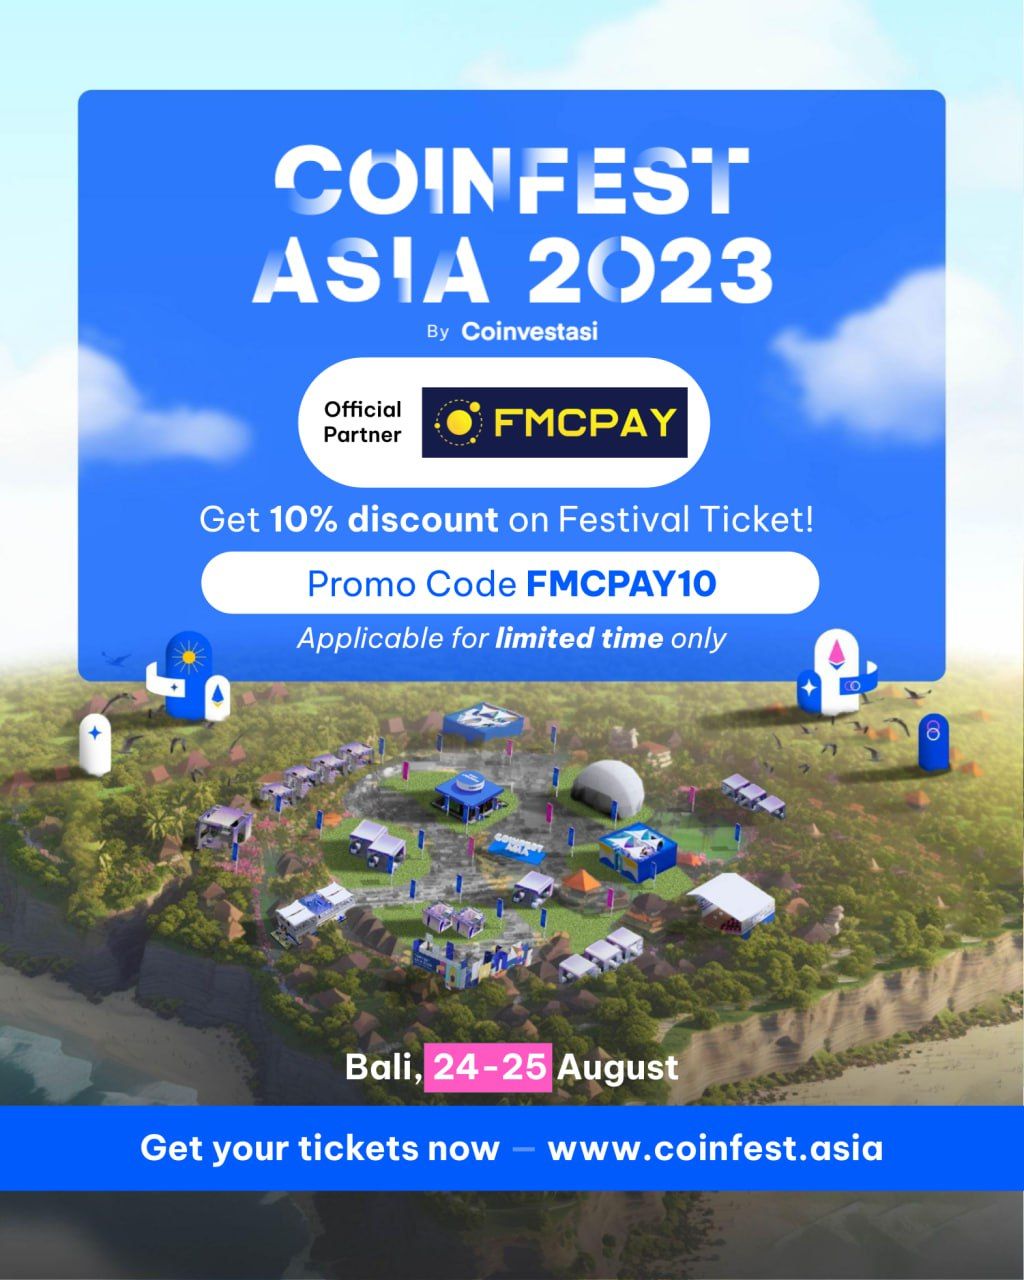 fmcpay announced as community partner for coinfest asia 2023